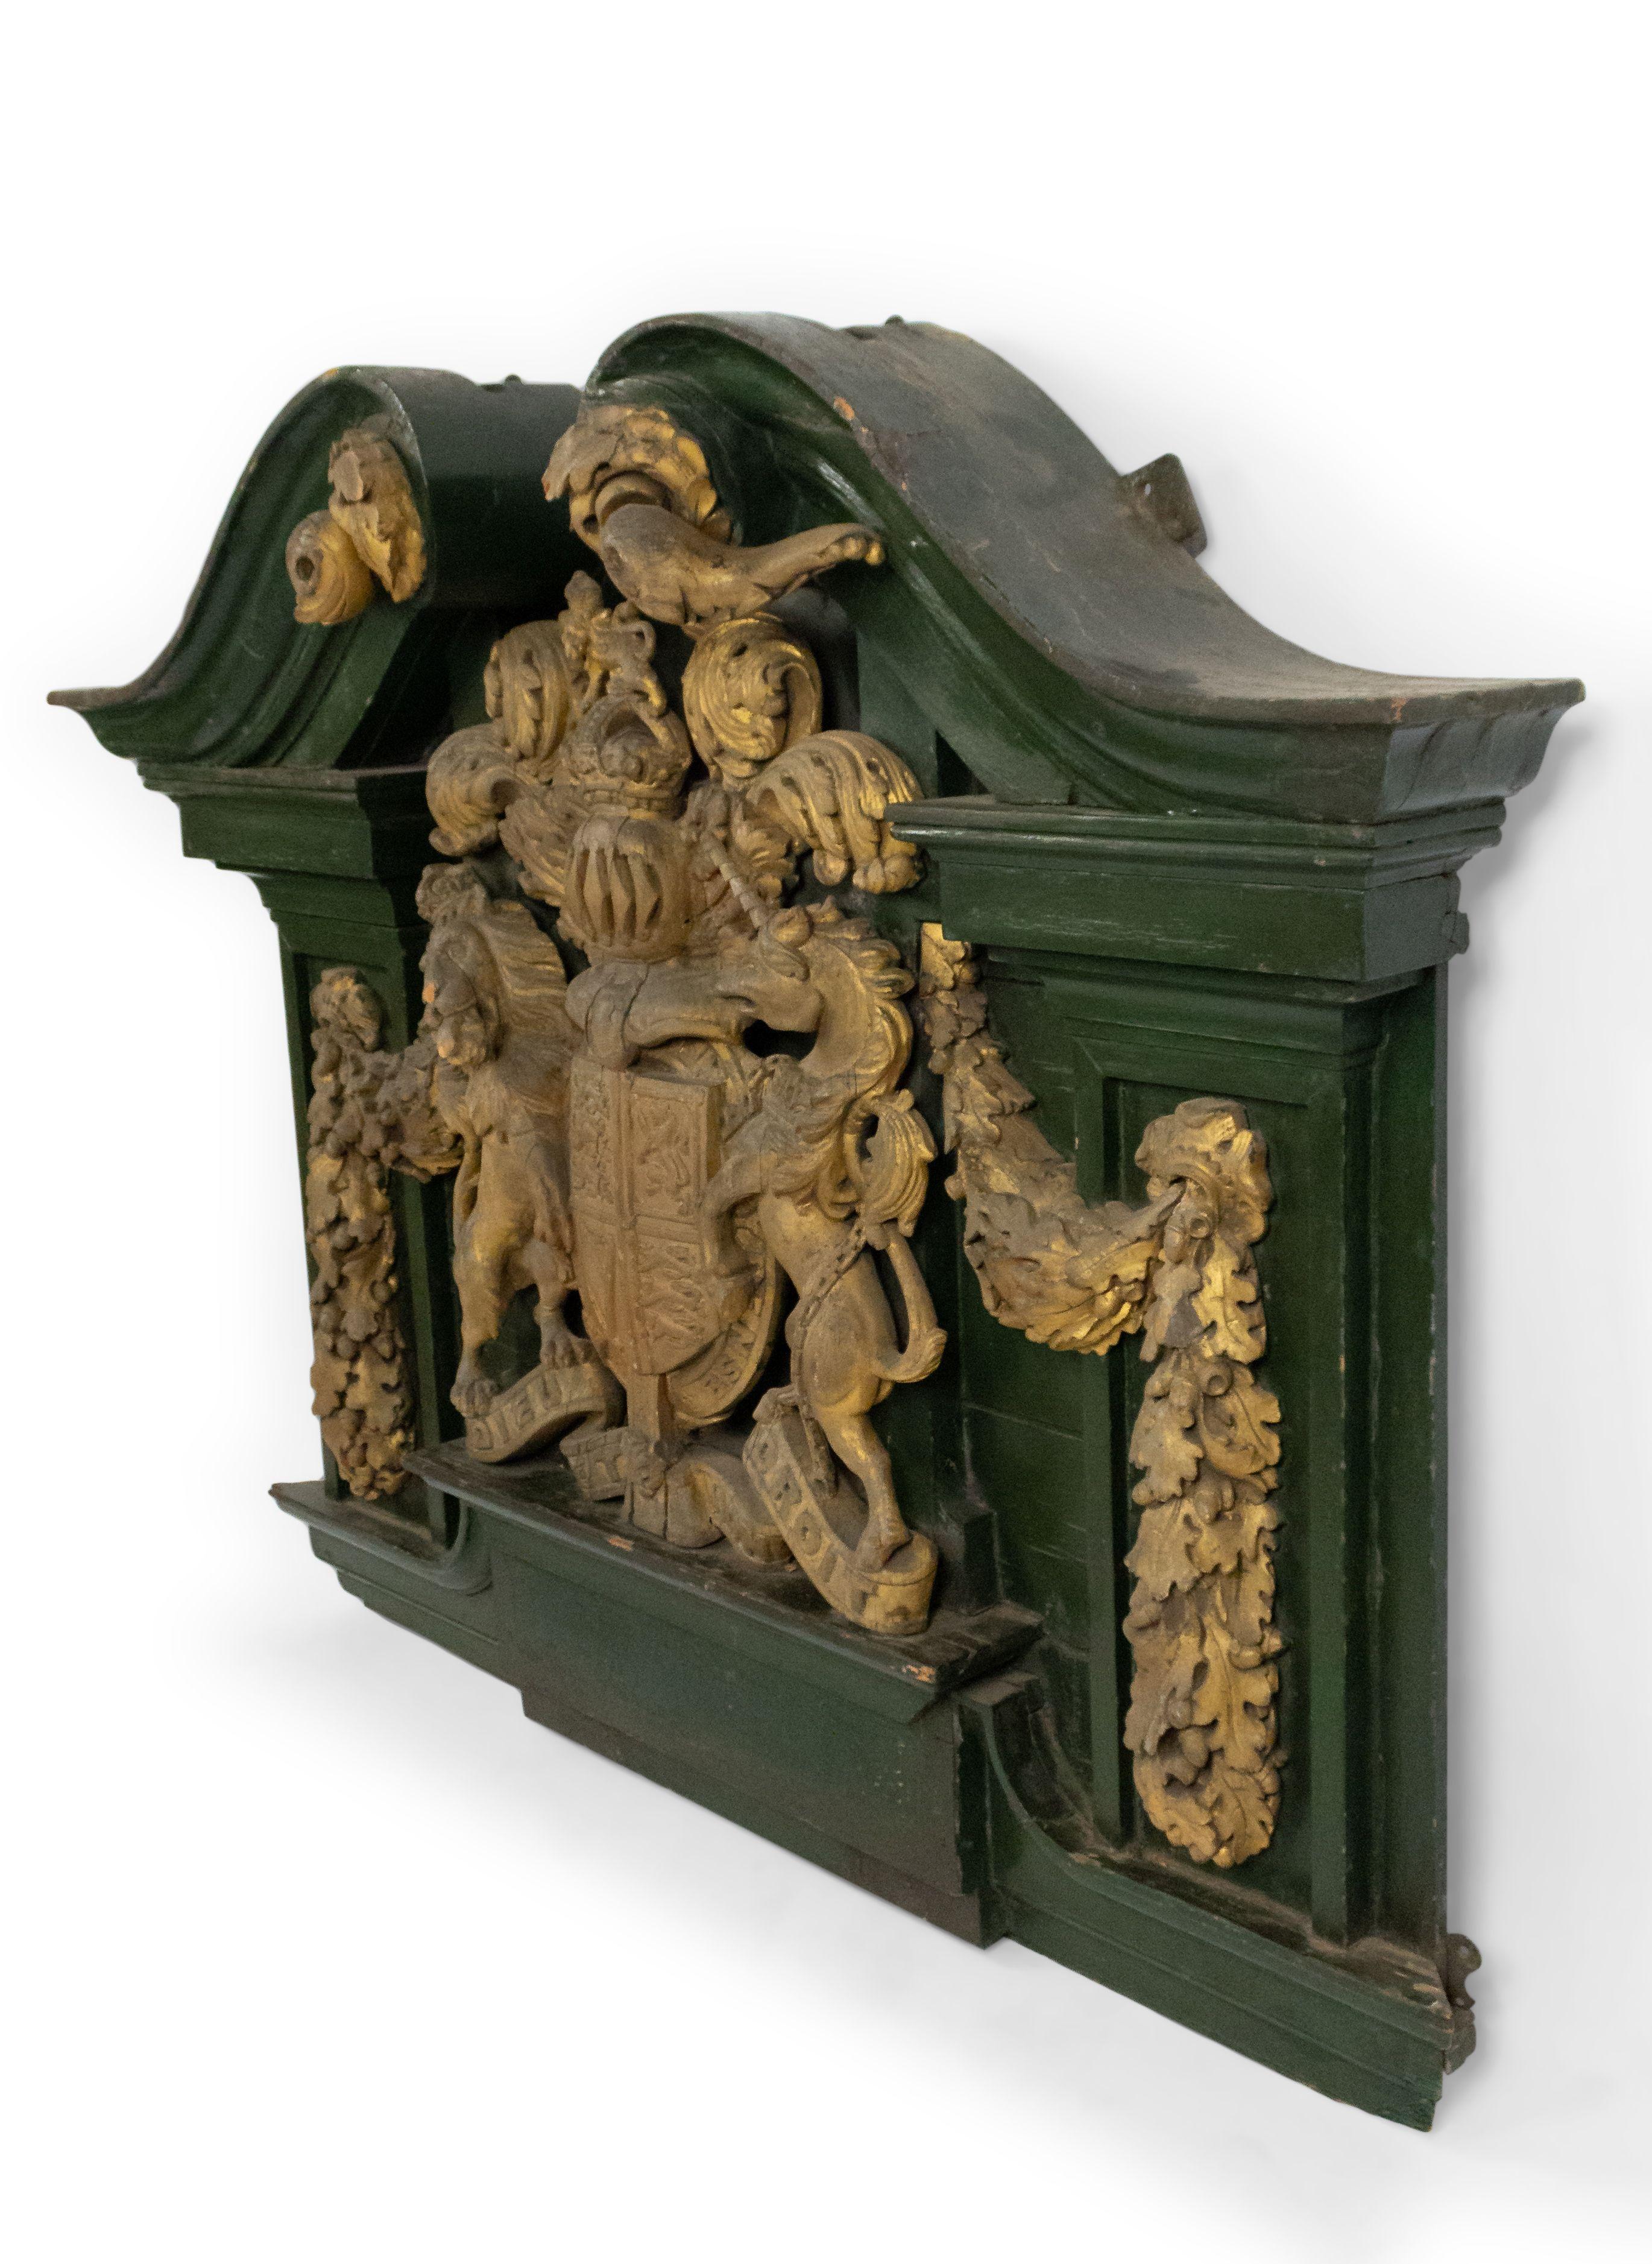 English Georgian (18/19th century) green painted and carved gilt wall plaque of coat of arms with unicorn & lion and broken pediment top.